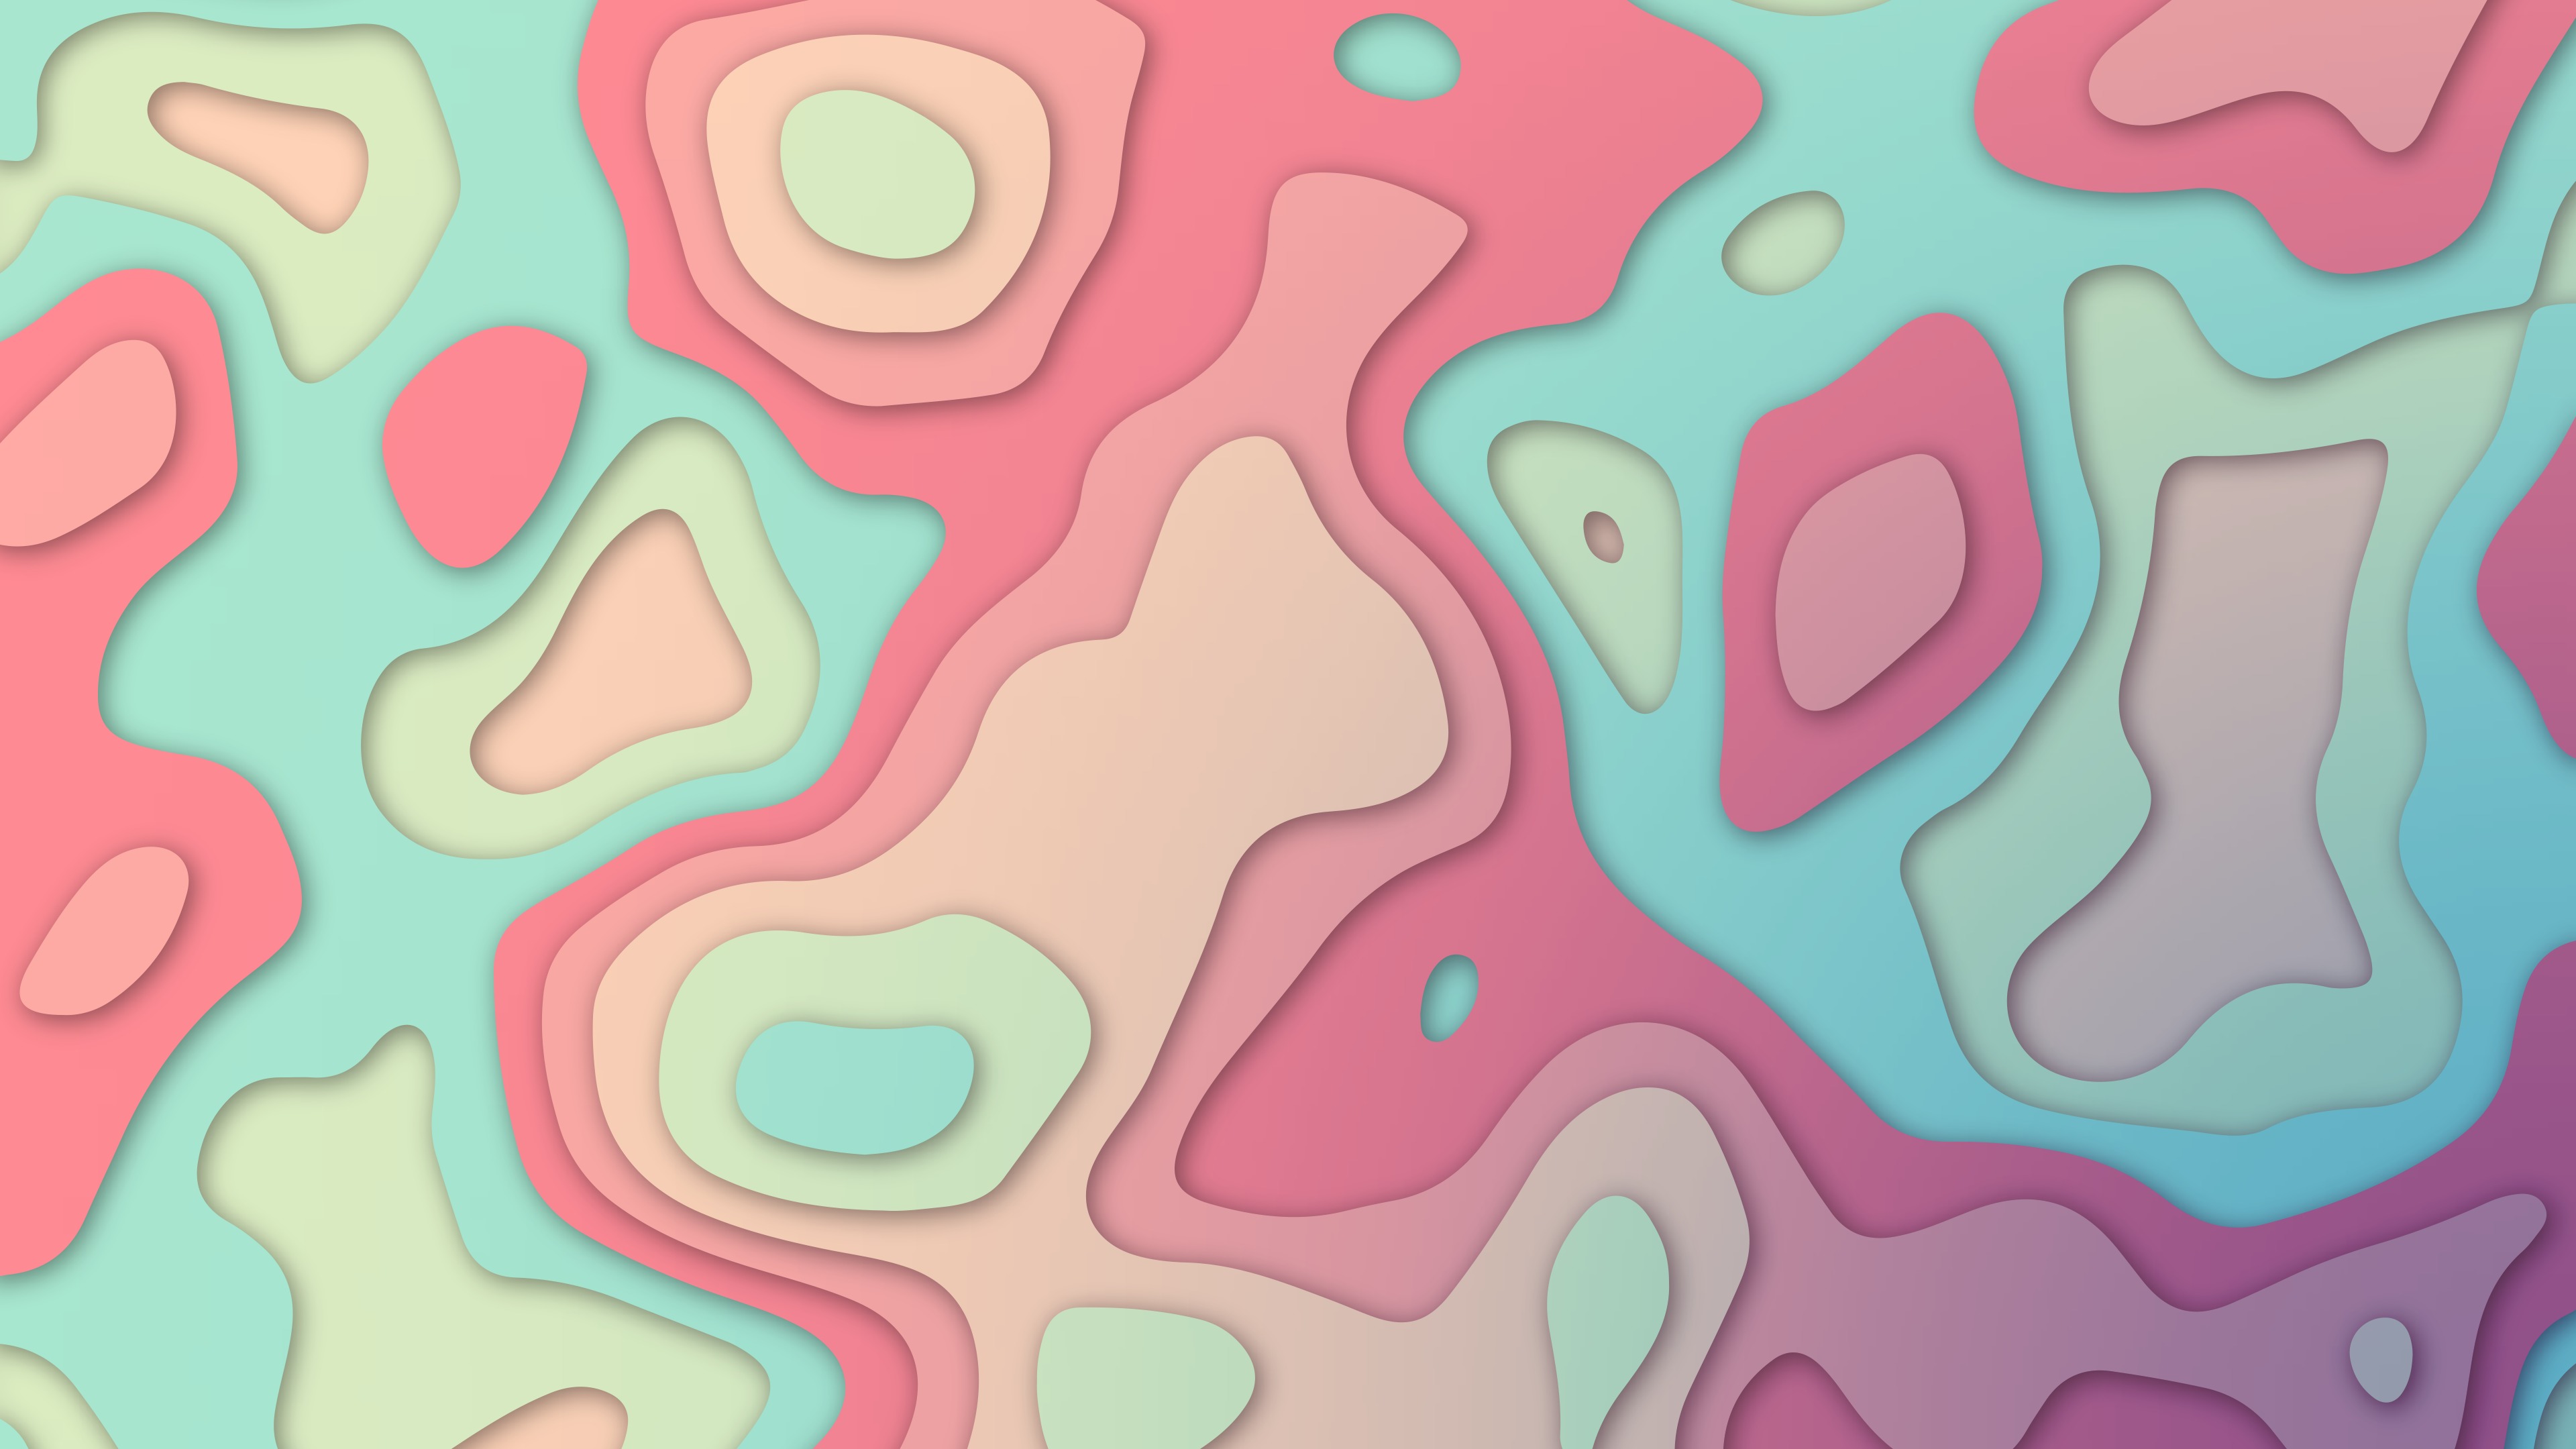 Pastel Slide Elevation Colorful Abstract Wallpaper HD 4k